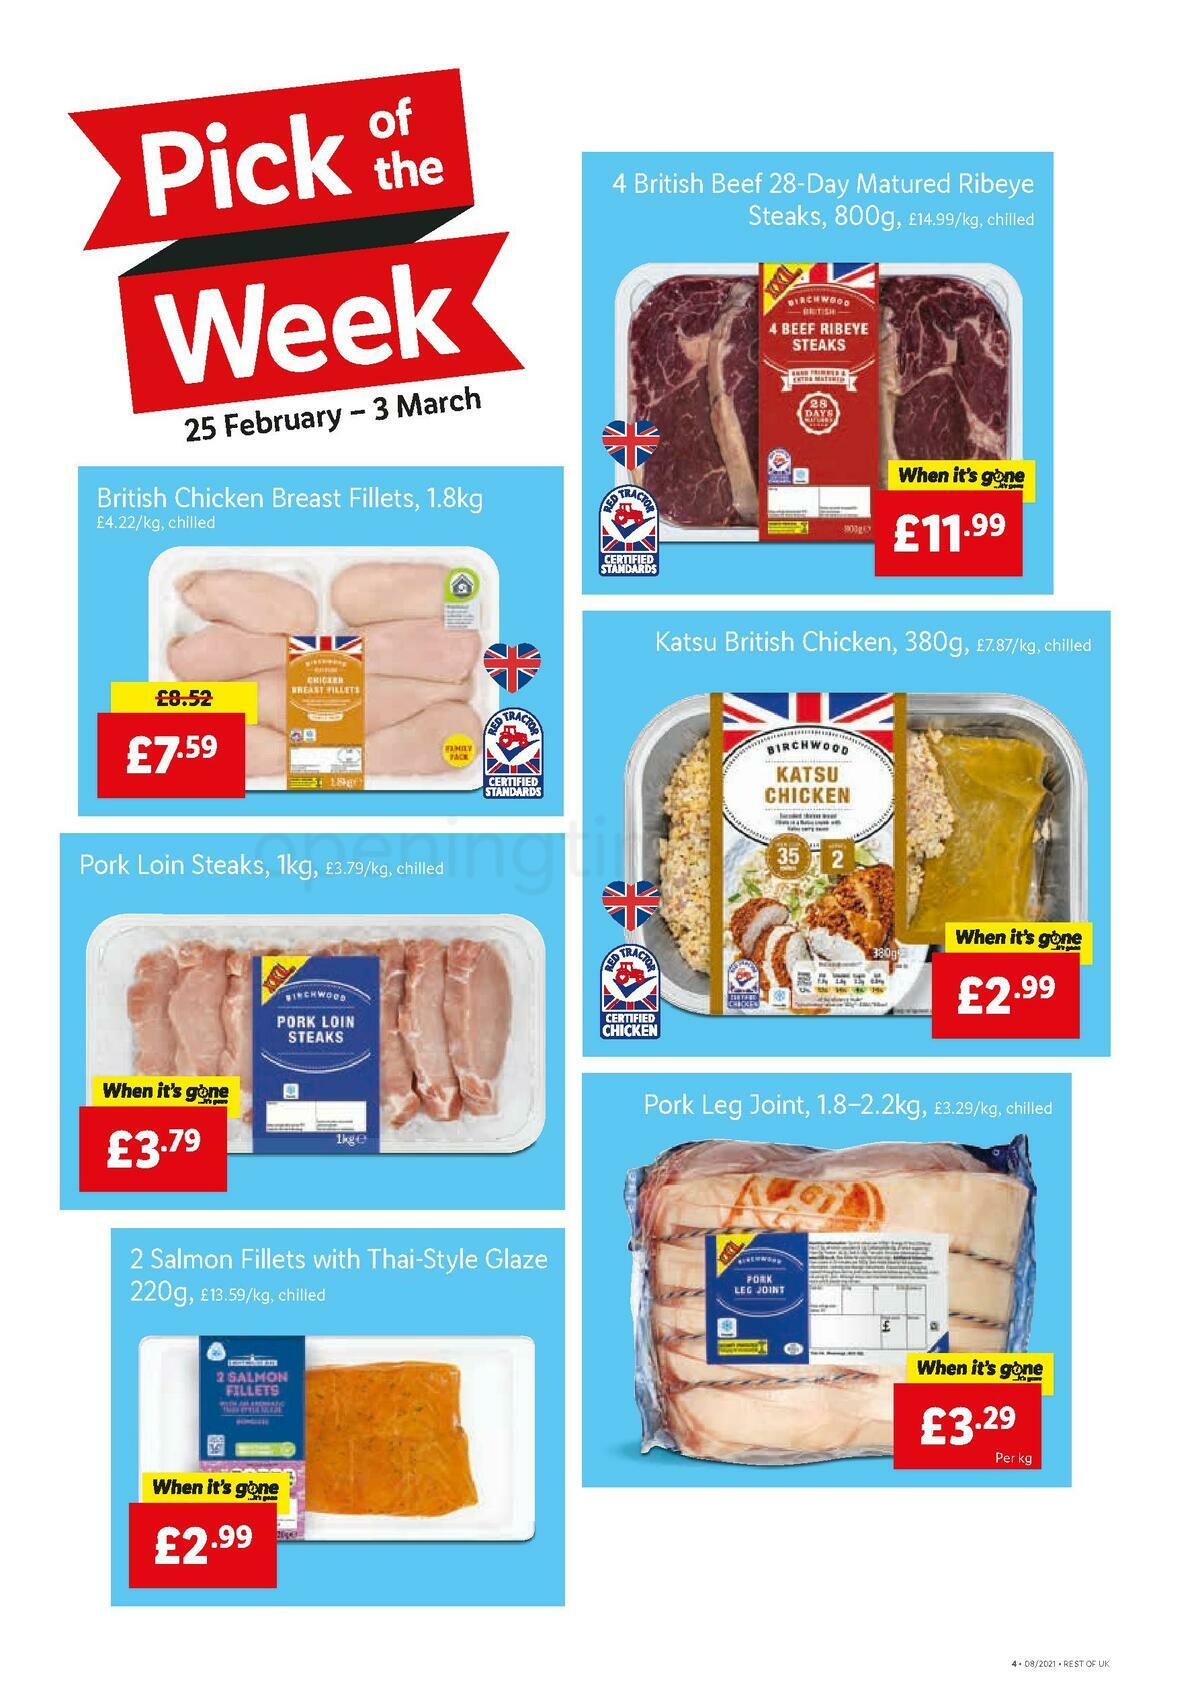 LIDL Offers from 25 February